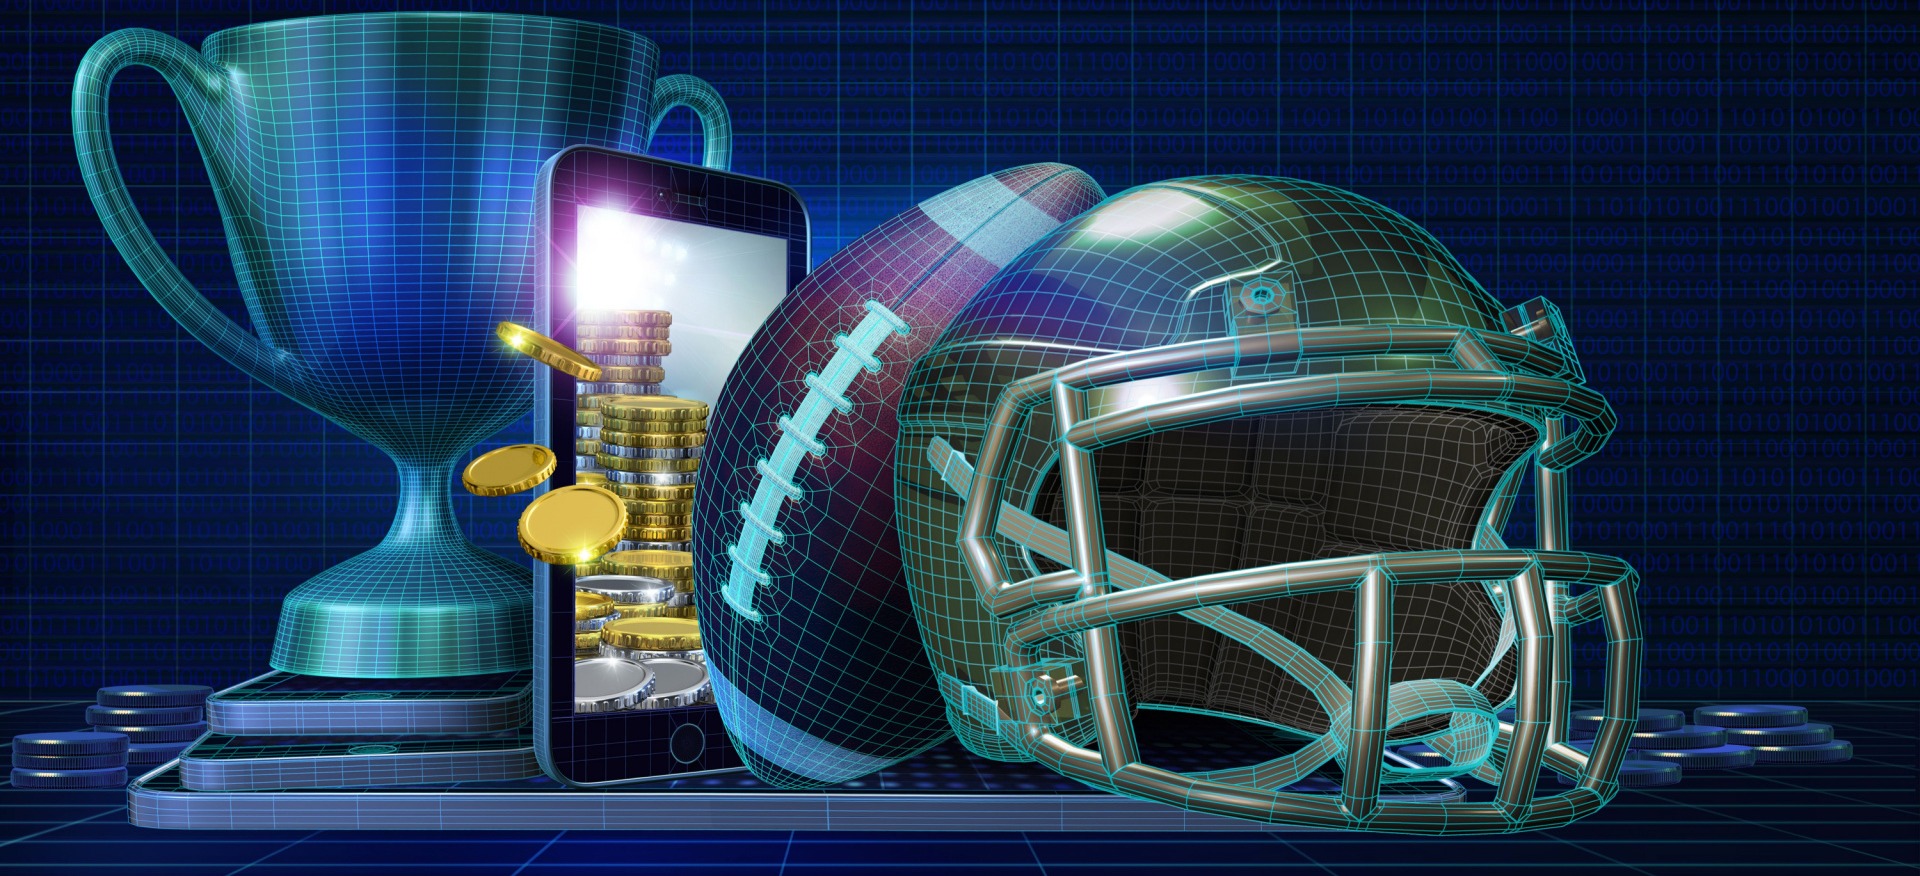 Sports equipment next to smartphone with sportsbook promo on